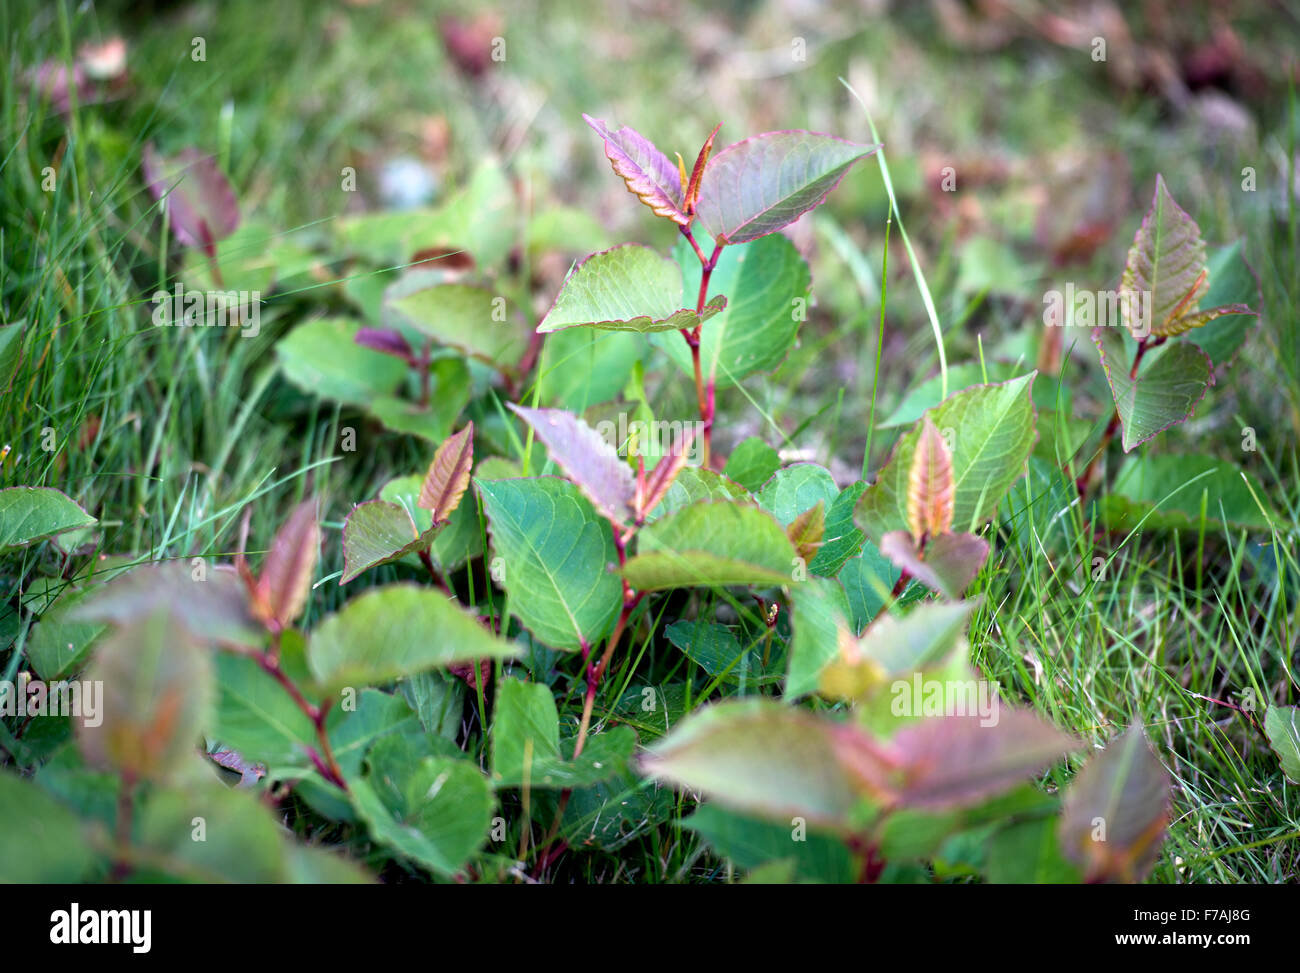 Japanese Knotweed (Fallopia japonica) growing in a lawn UK Stock Photo